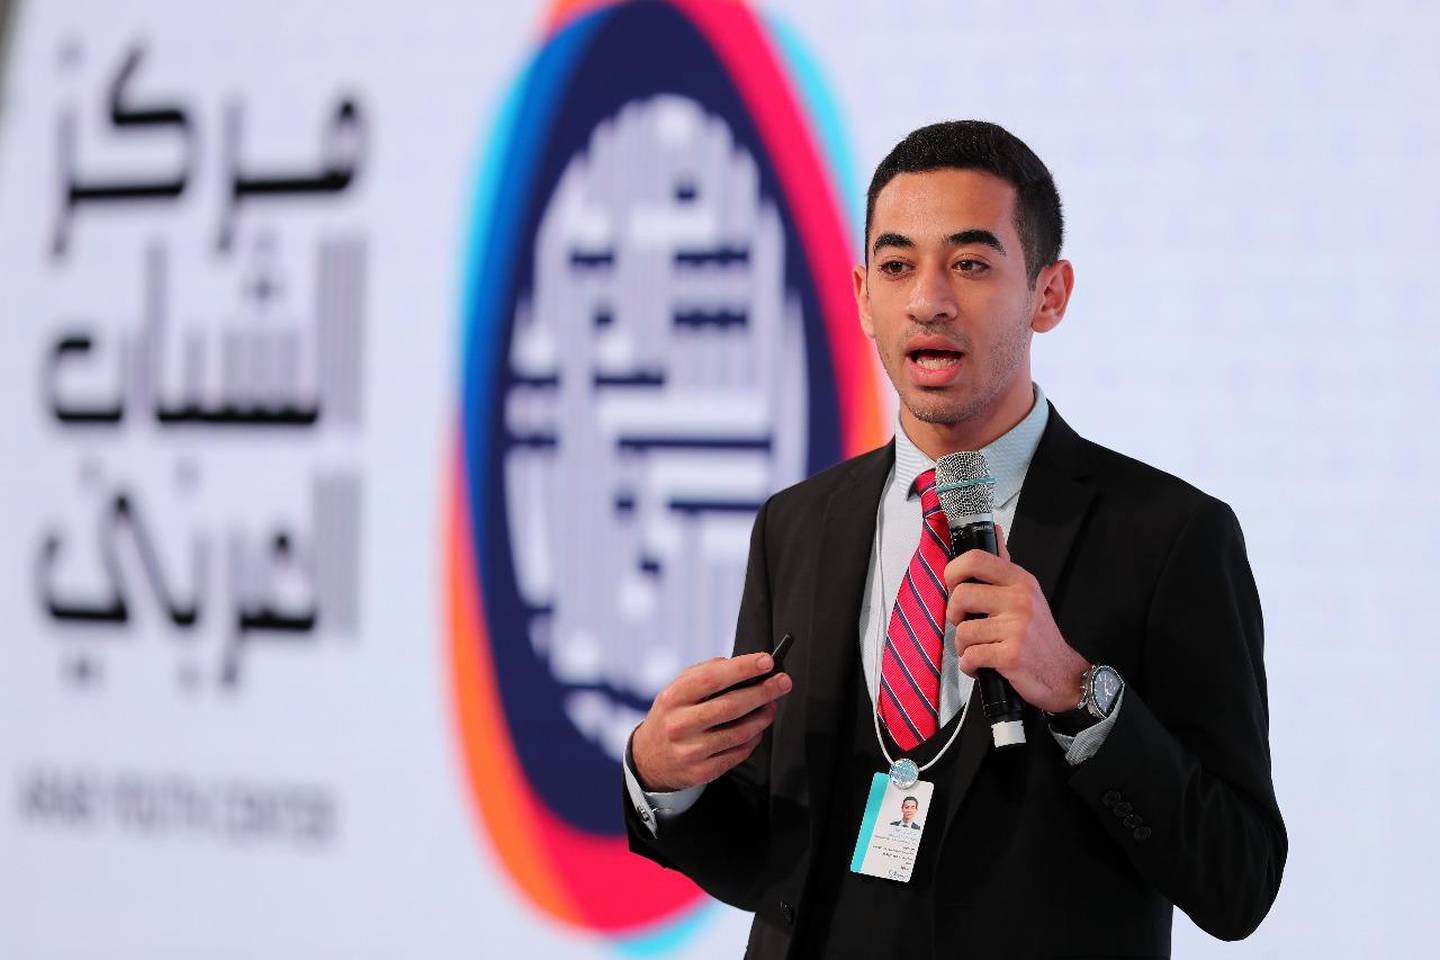 A young Arab entrepreneur pitches his idea for solving problems of youth unemployment. Chris Whiteoak / The National